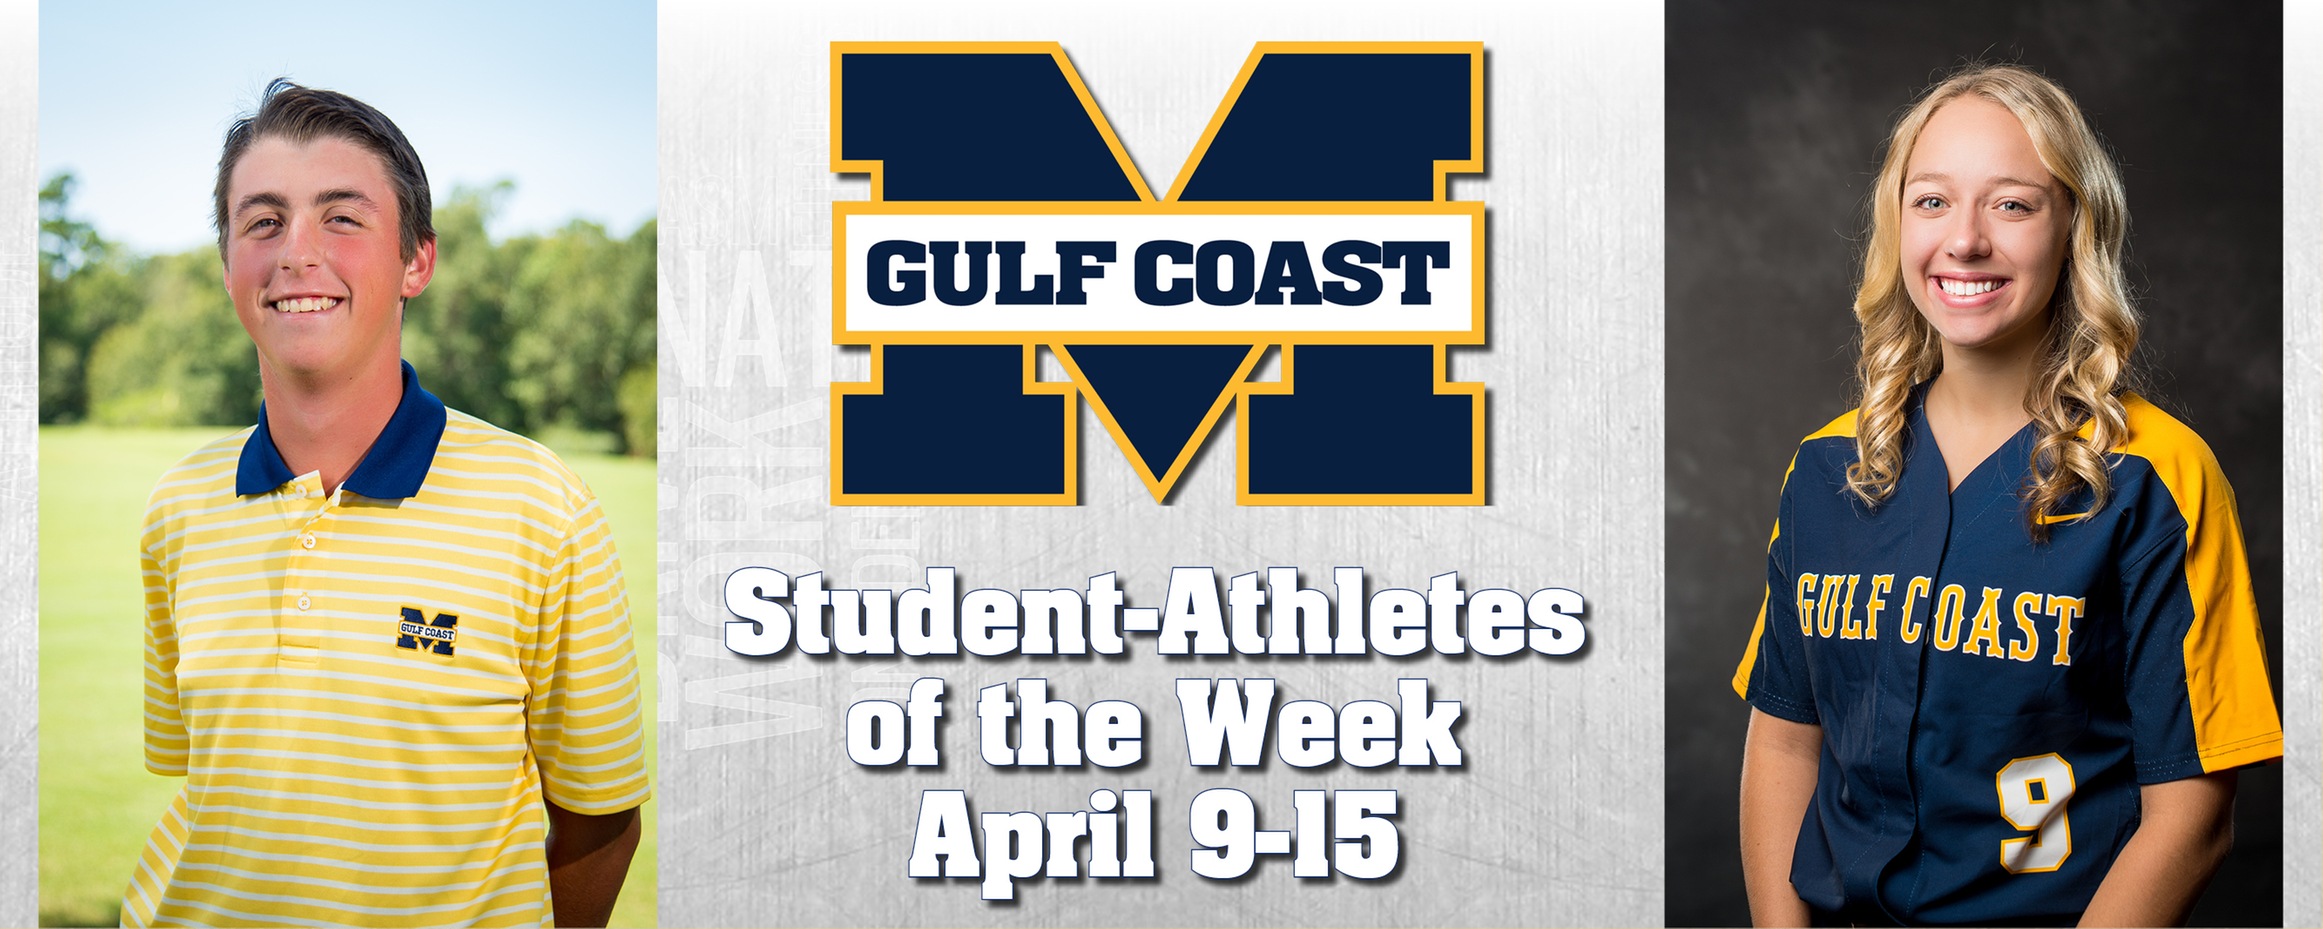 Wedgeworth, Sanders named MGCCC Student-Athletes of the Week